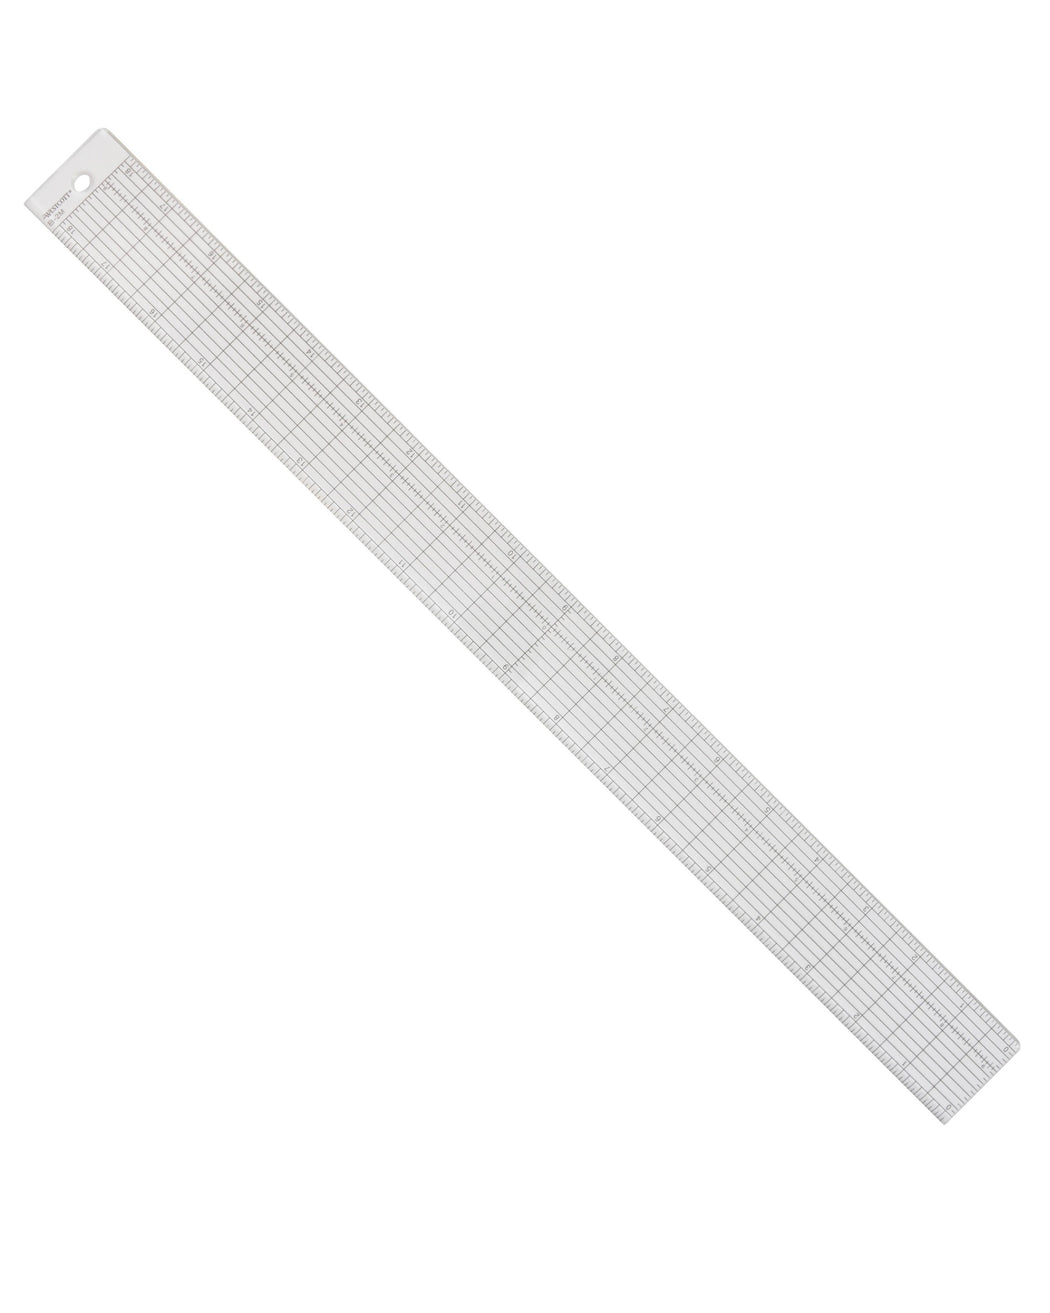 Clear Ruler with Steel Edge - Zipper and Thread